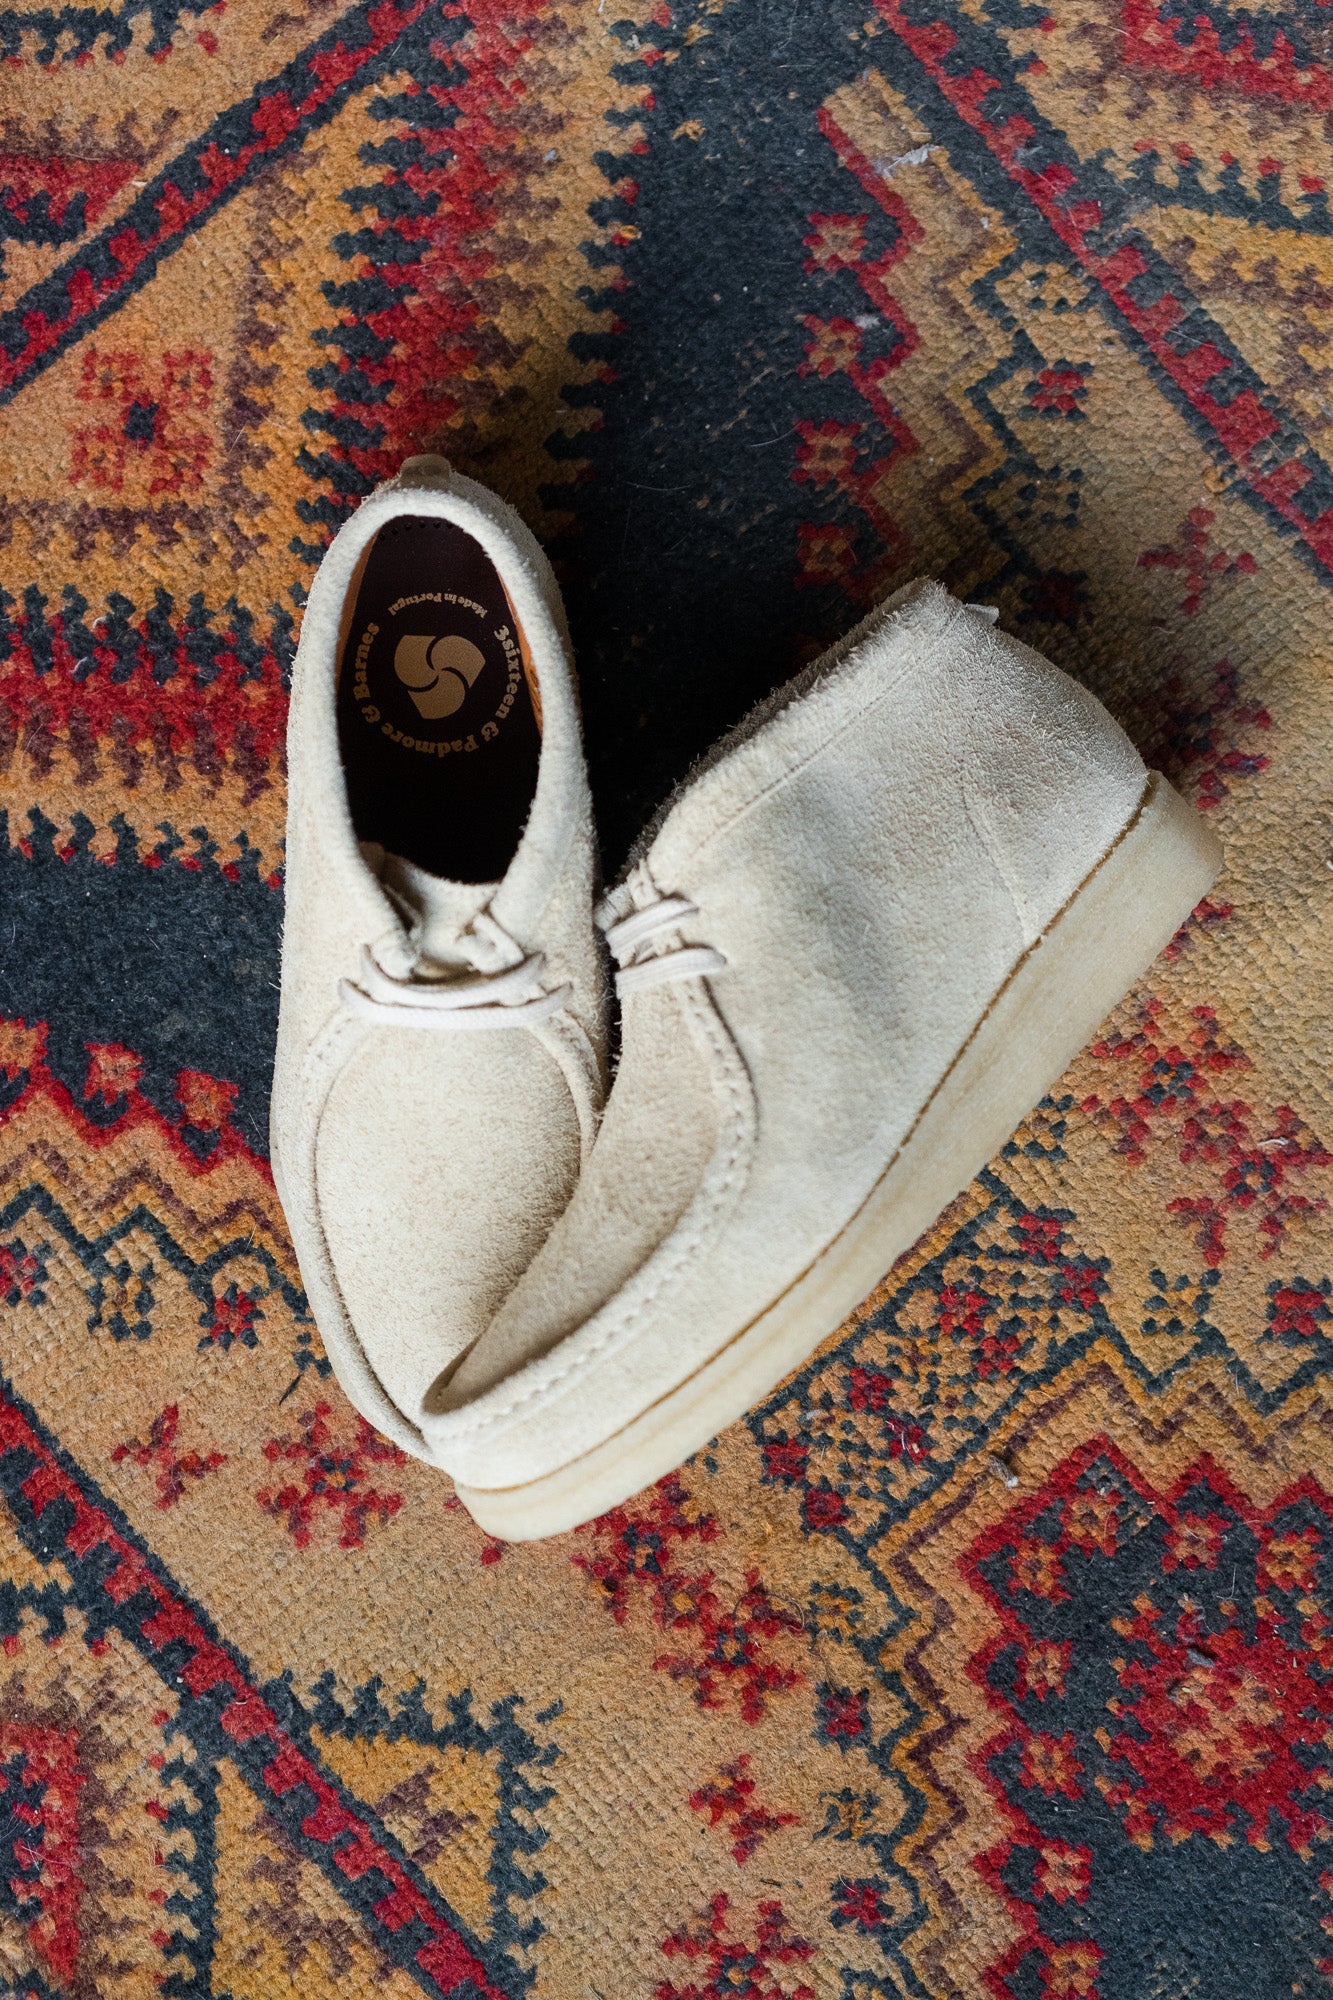 A pair of light tan shoes on a rug.